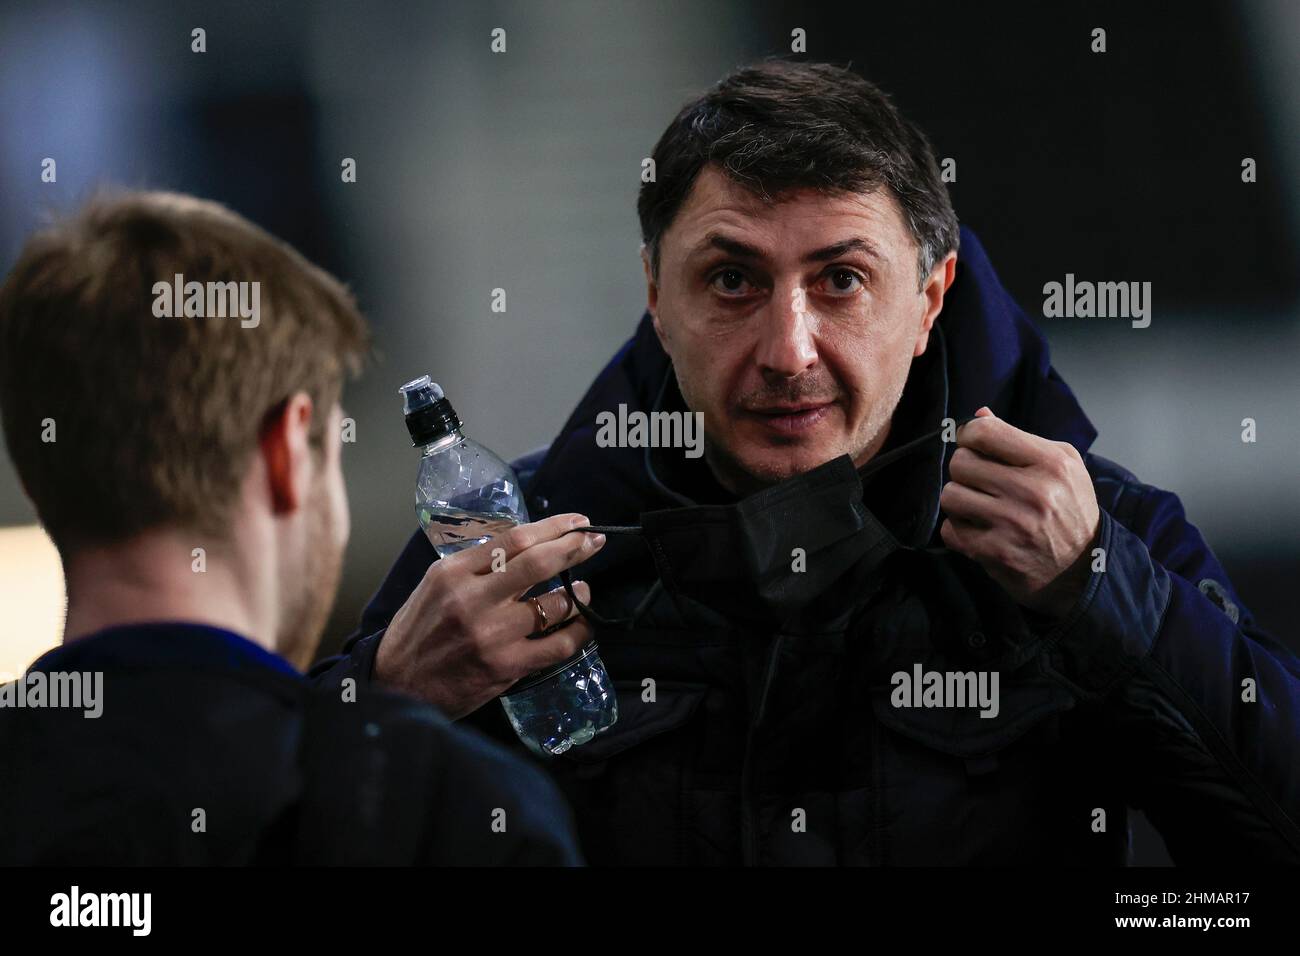 Shota Arveladze the Hull City manager has a chat before the game Stock Photo